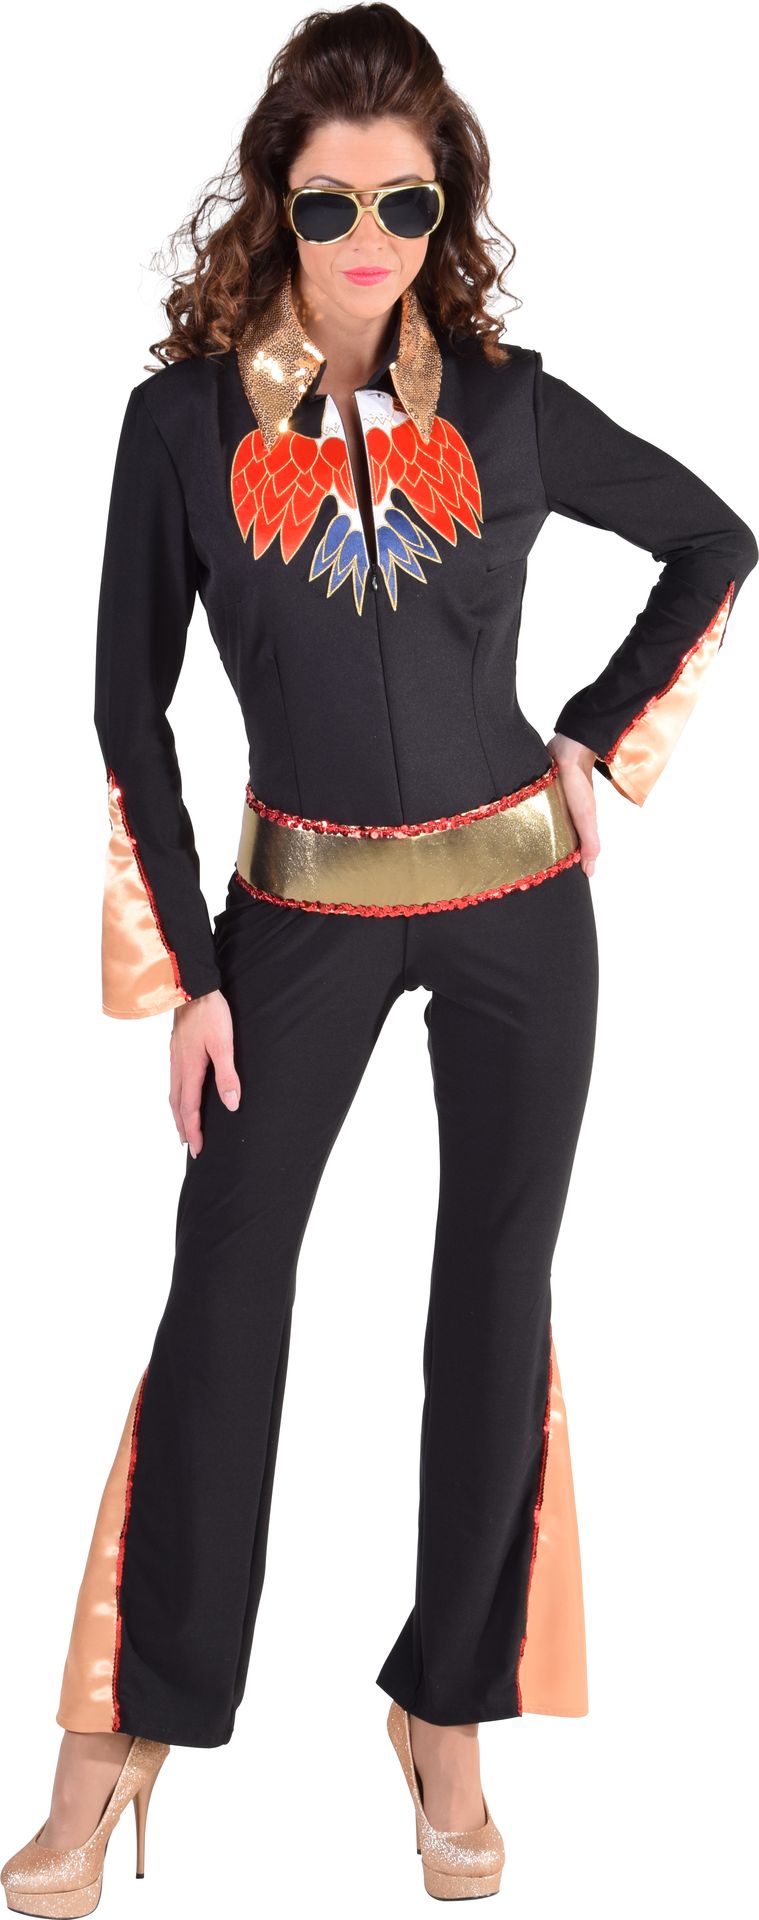 Catsuit rockster vrouwen